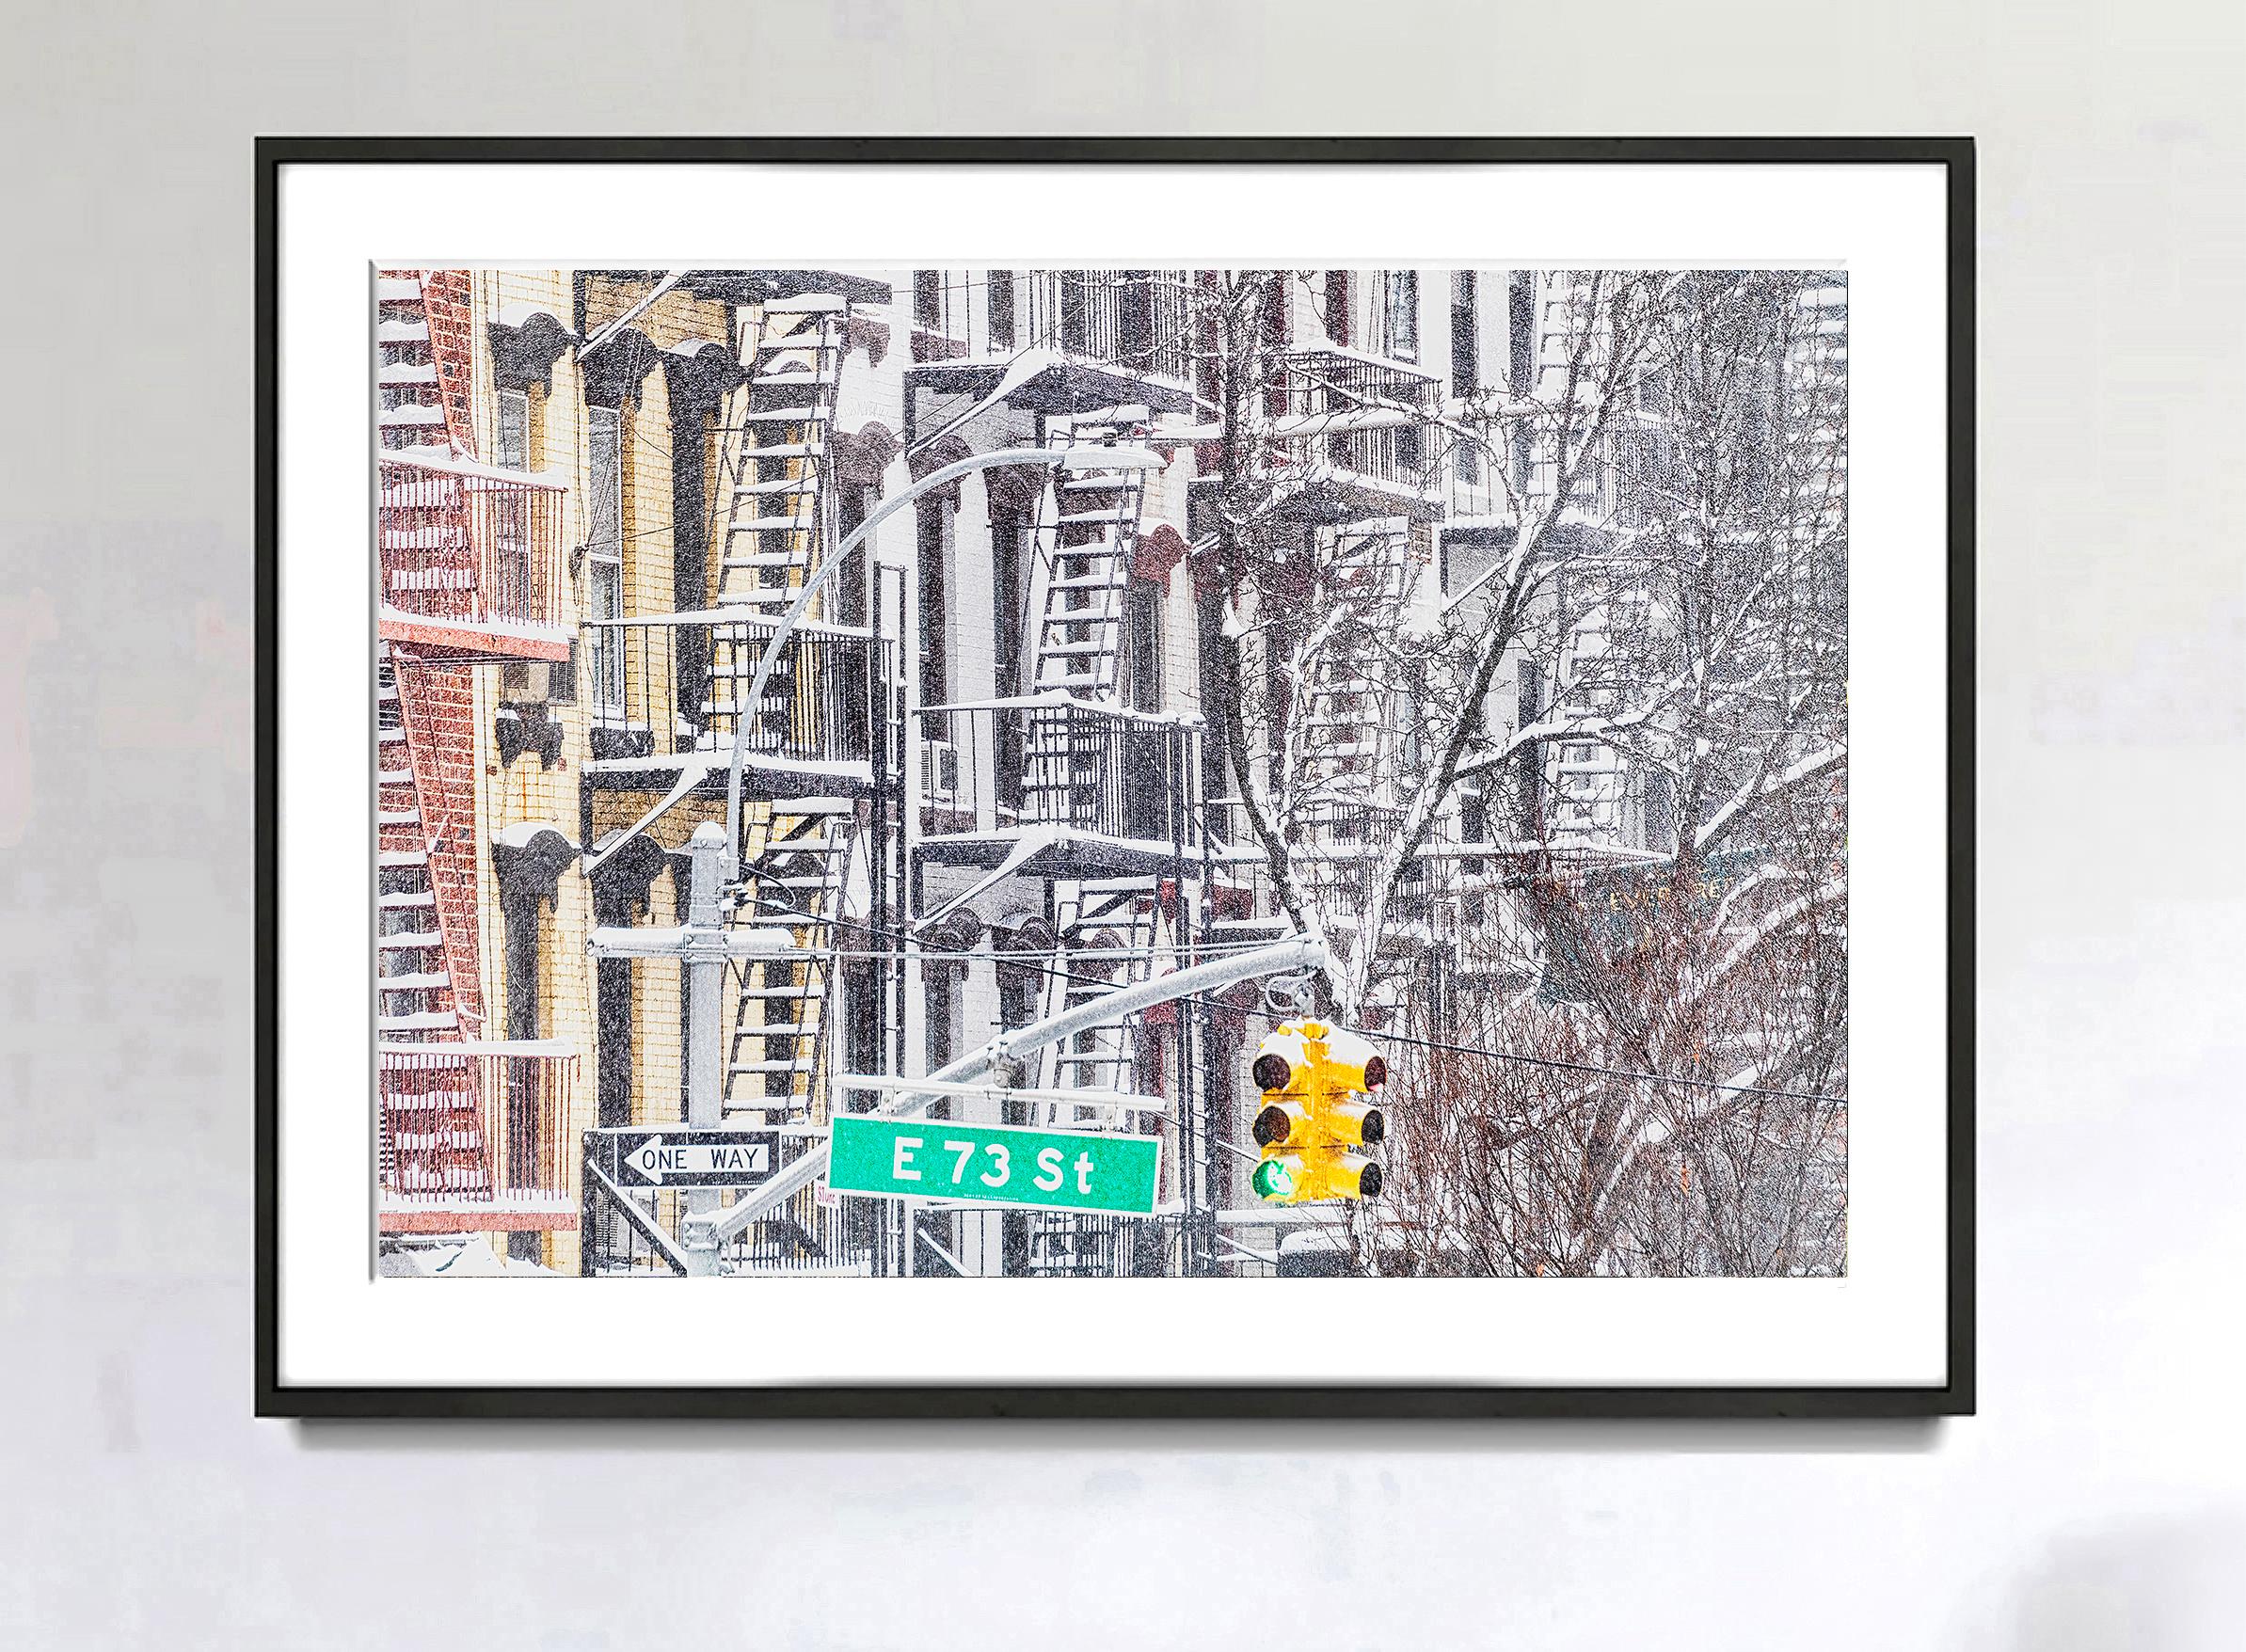 A New York City snowstorm allows Street Photographer Mitchell Funk to transform facades of Upper Eastside walkups into a stunning impressionist cityscape. Monochromatic grays are punctuated by punchy dayglow colors of a street sign and a street